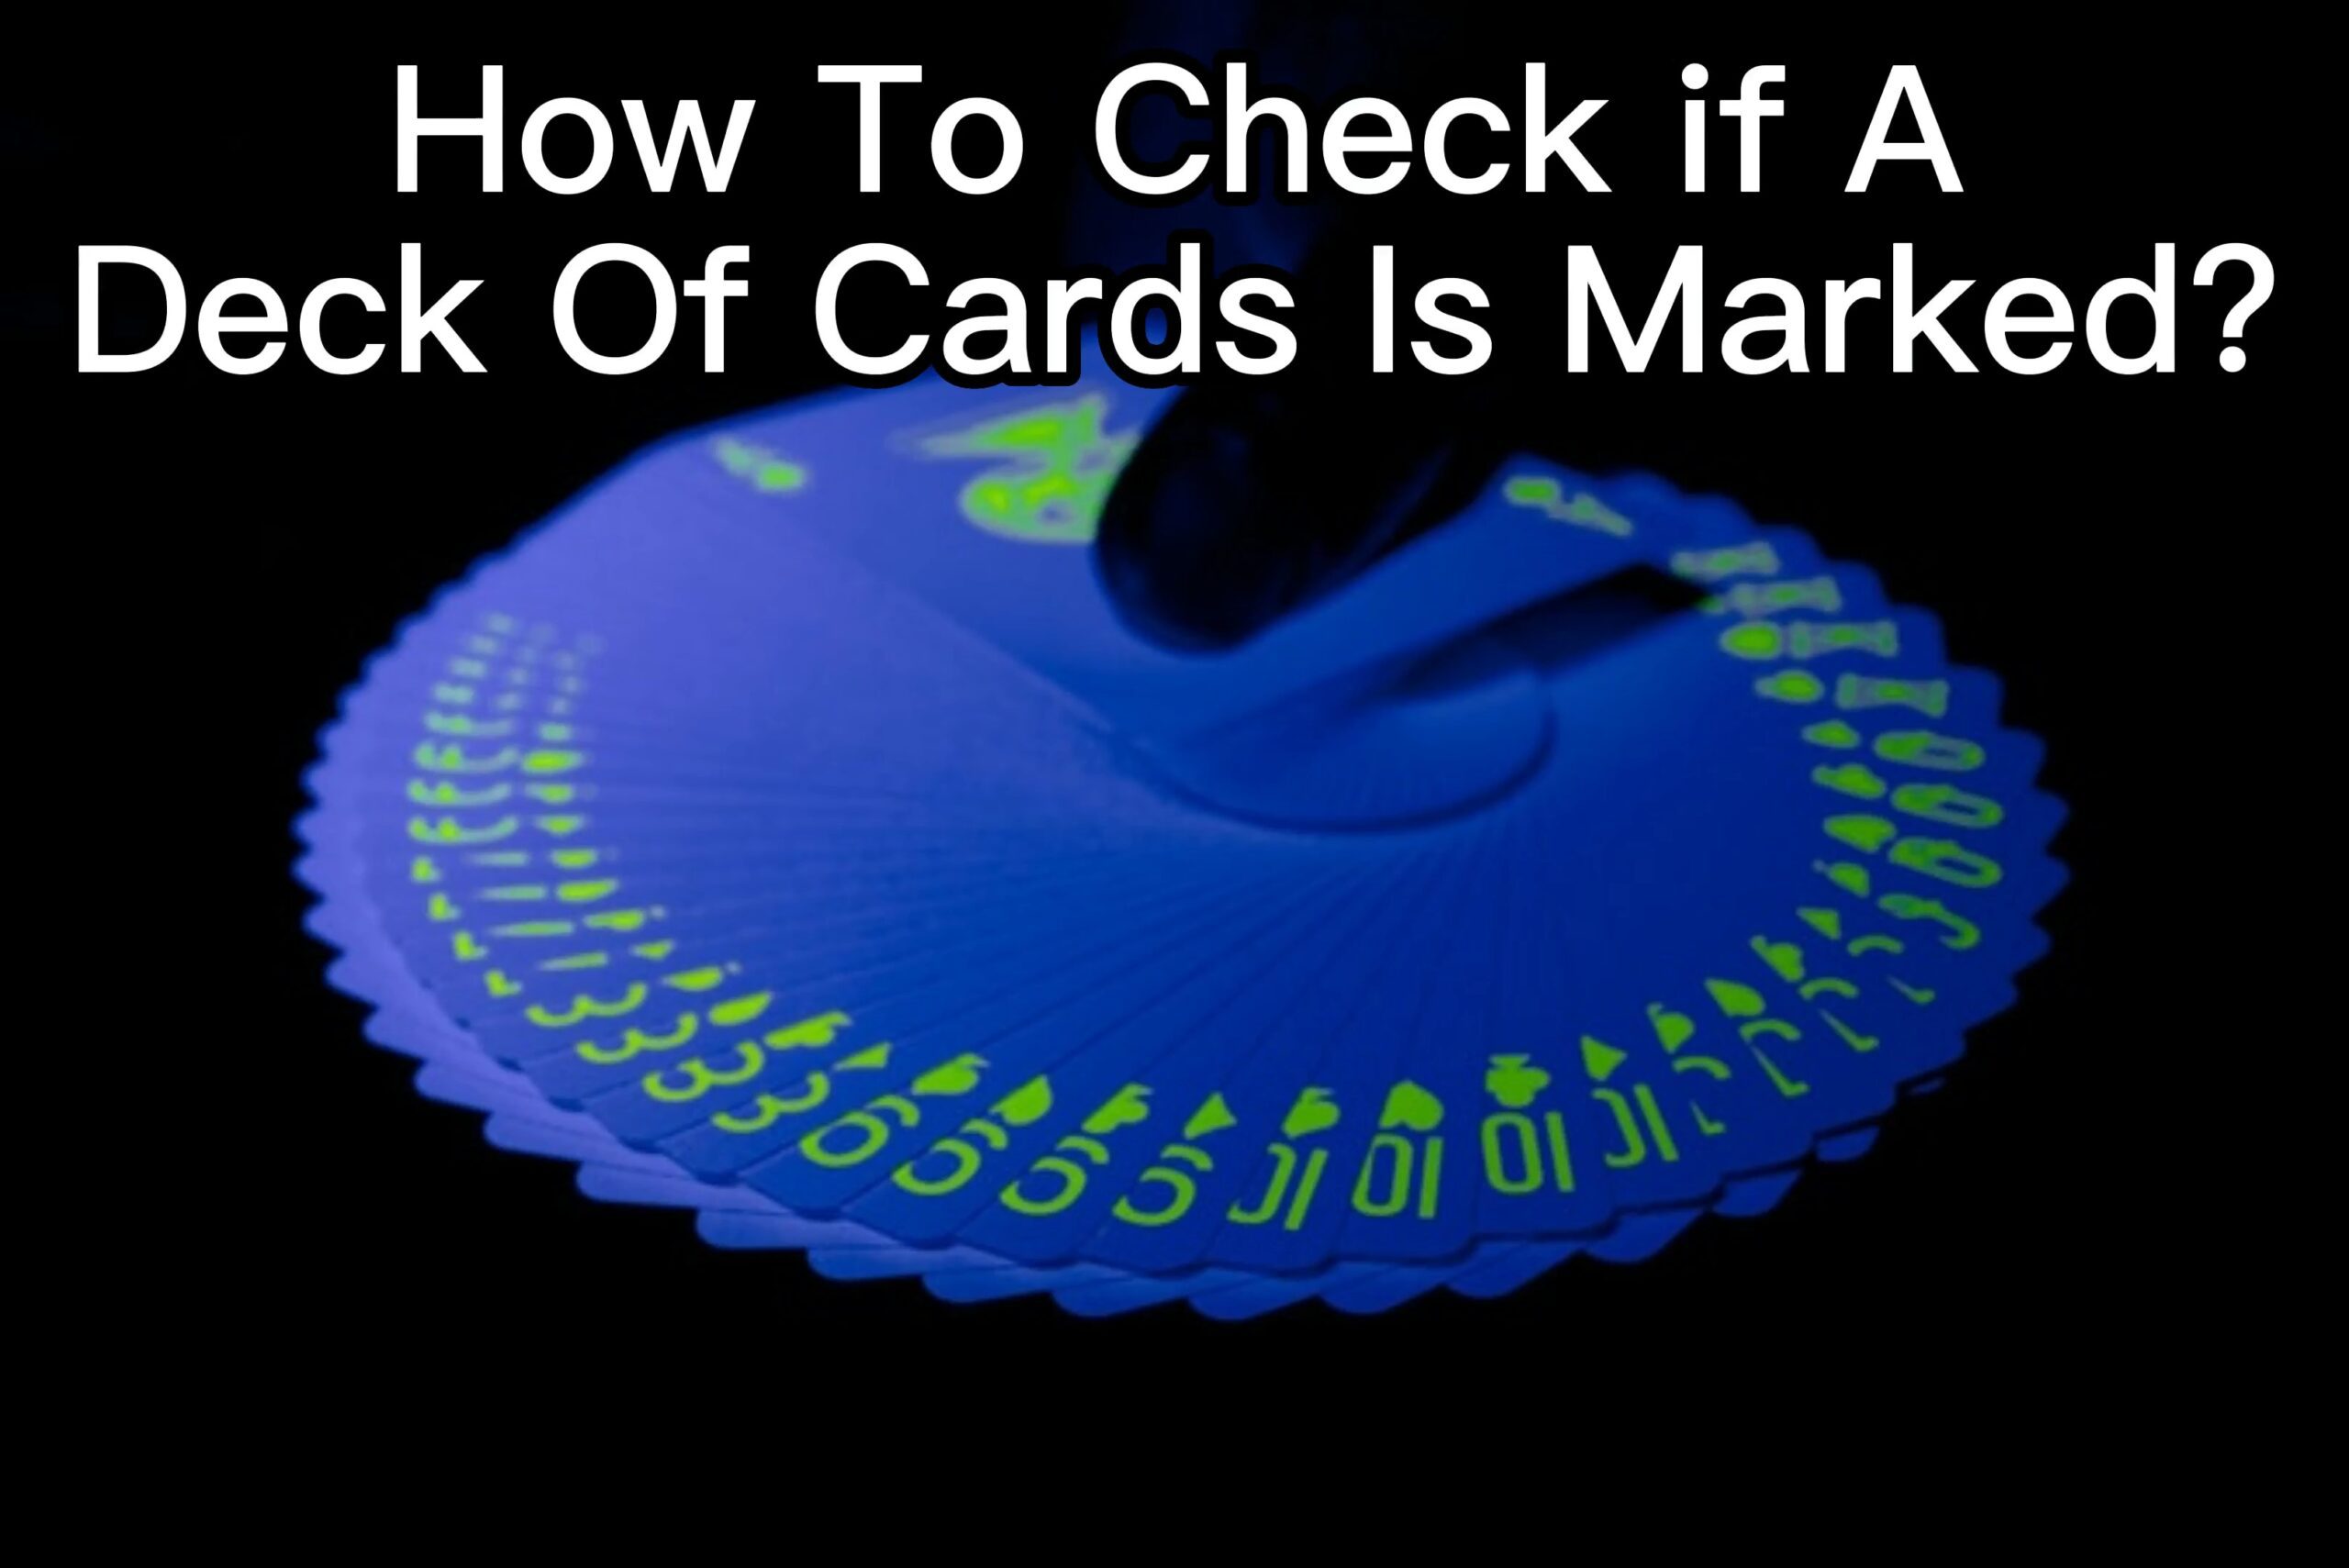 How To Check if A Deck Of Cards Is Marked